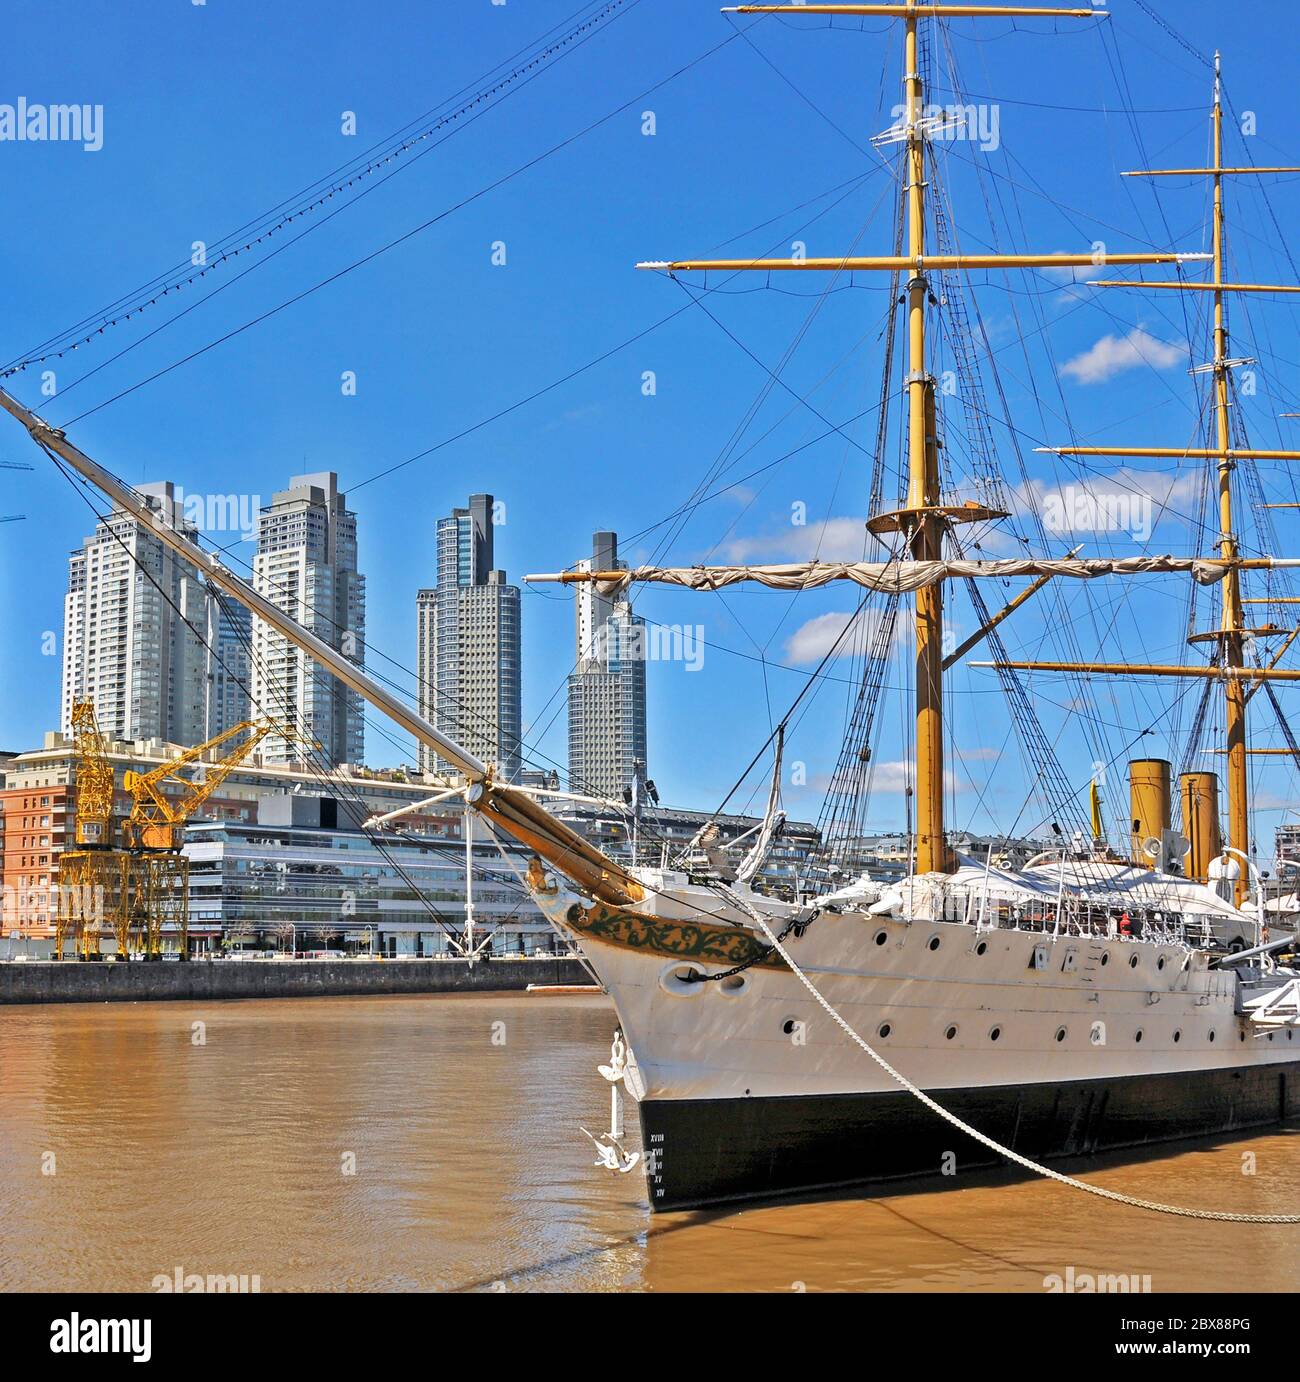 A Puerto Madero Buenos Aires, Argentina Foto Stock